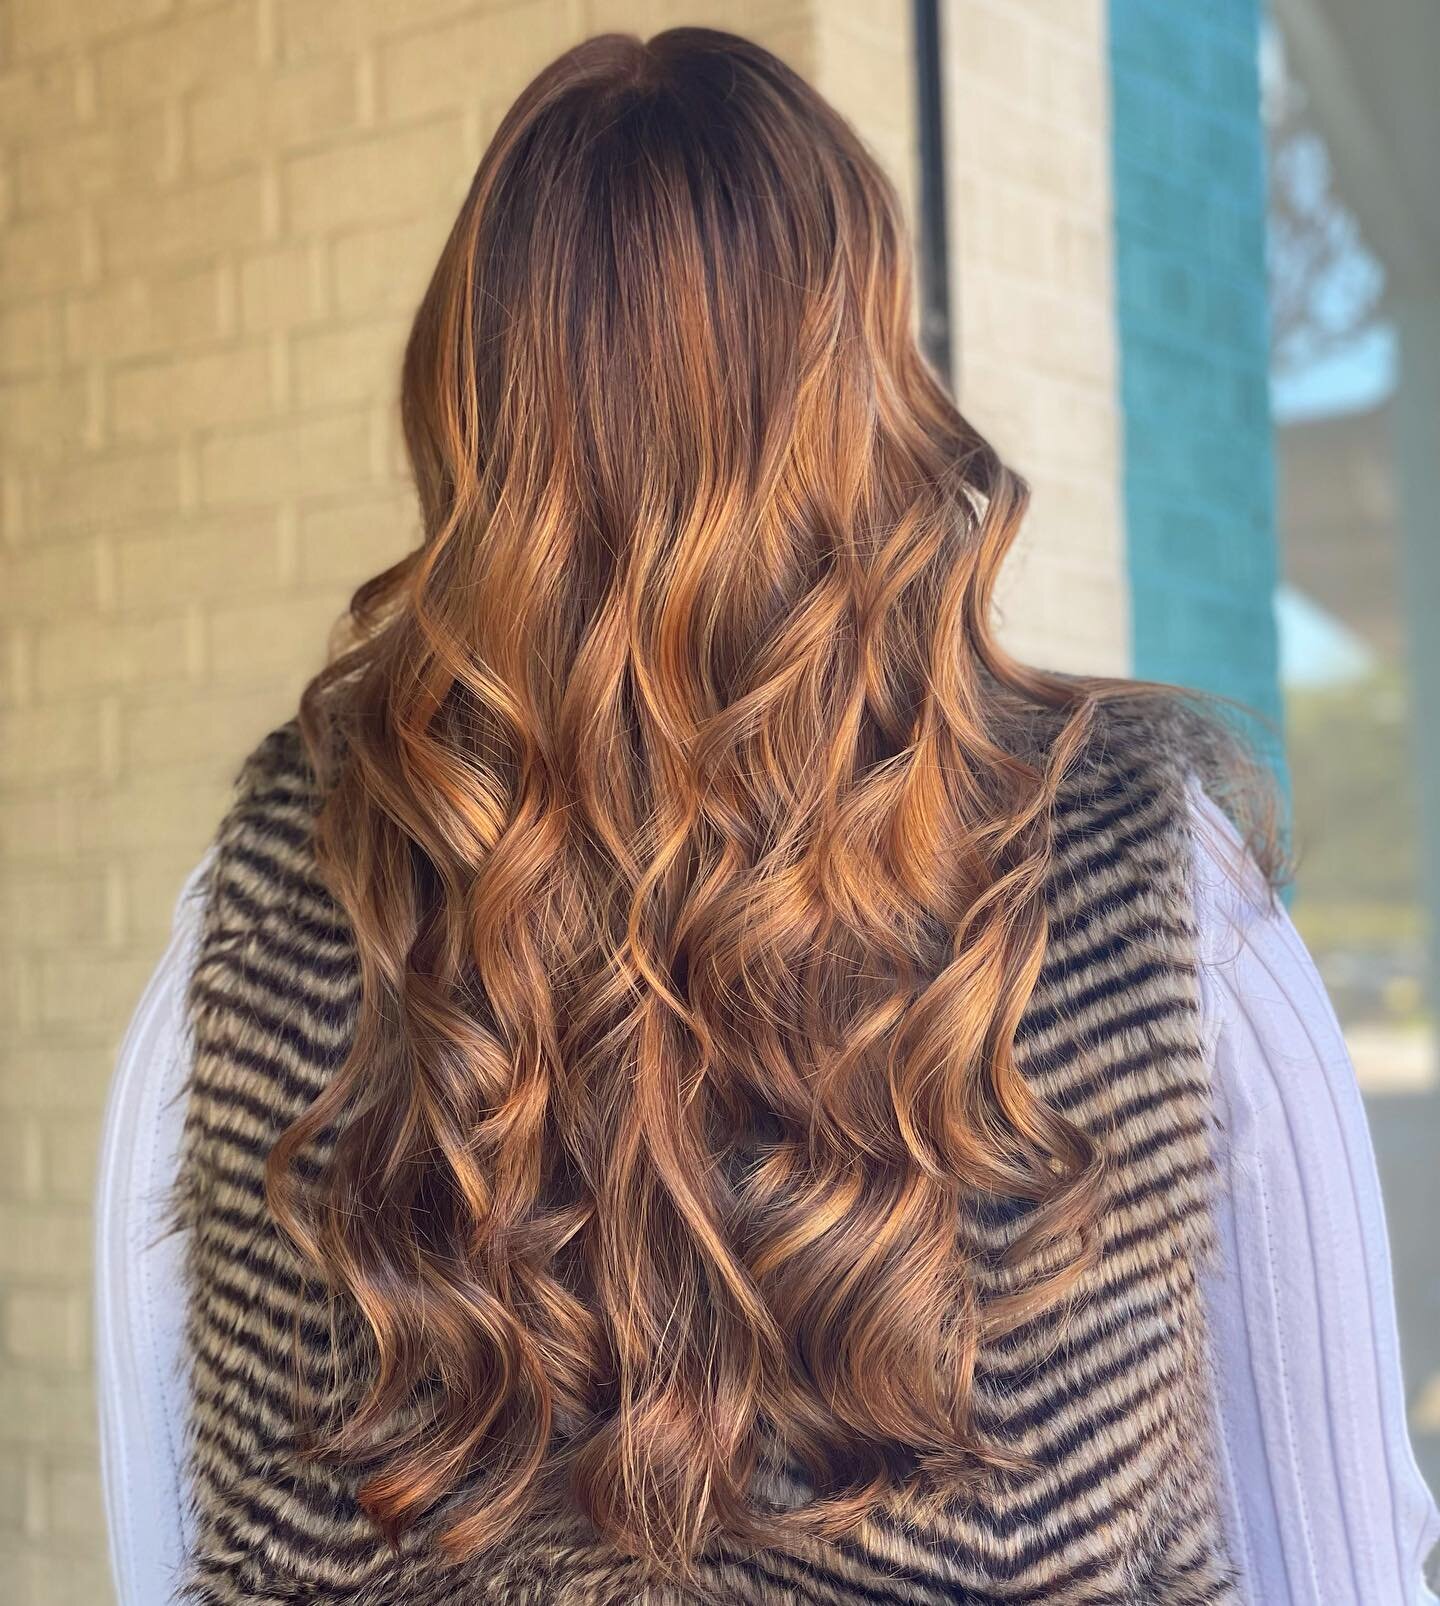 Redheads have more fun! 😍 @hairbyjk client has never colored her hair and decided to take the plunge and go red for her fist color change! Joanna did a balayage to give the lengths of her hair dimension followed by a root melt and a layering of glos